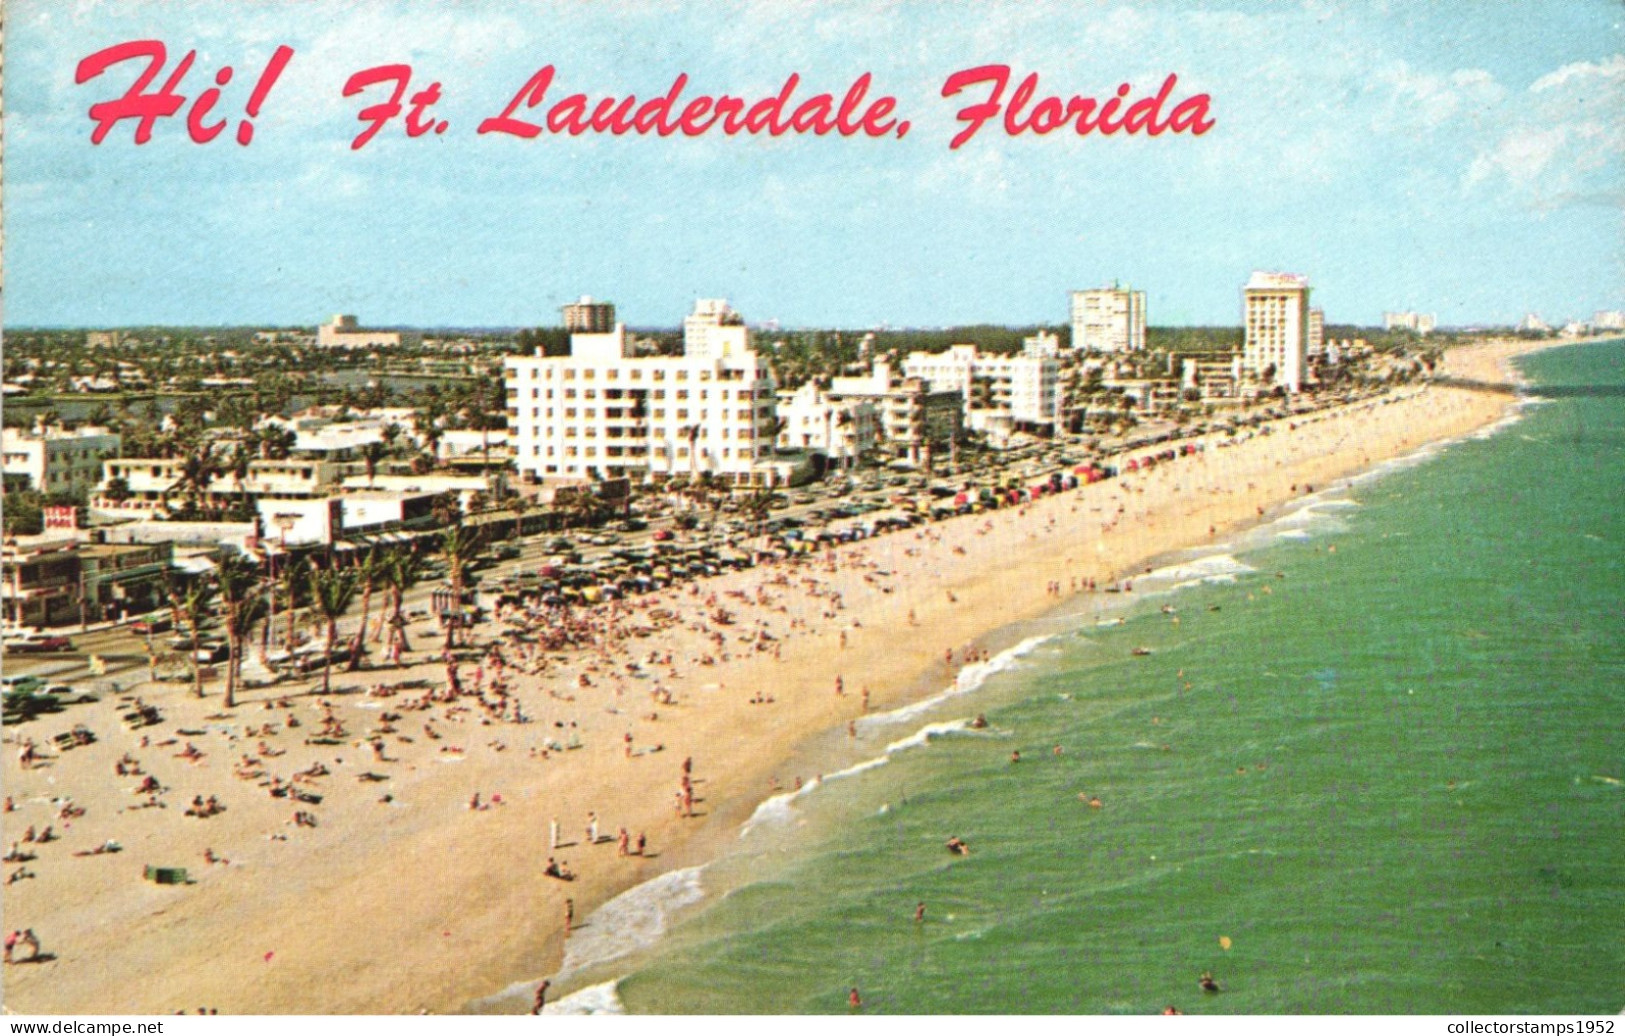 FORT LAUDERDALE, BEACH, ARCHITECTURE, CAR, FLORIDA, UNITED STATES, POSTCARD - Fort Lauderdale